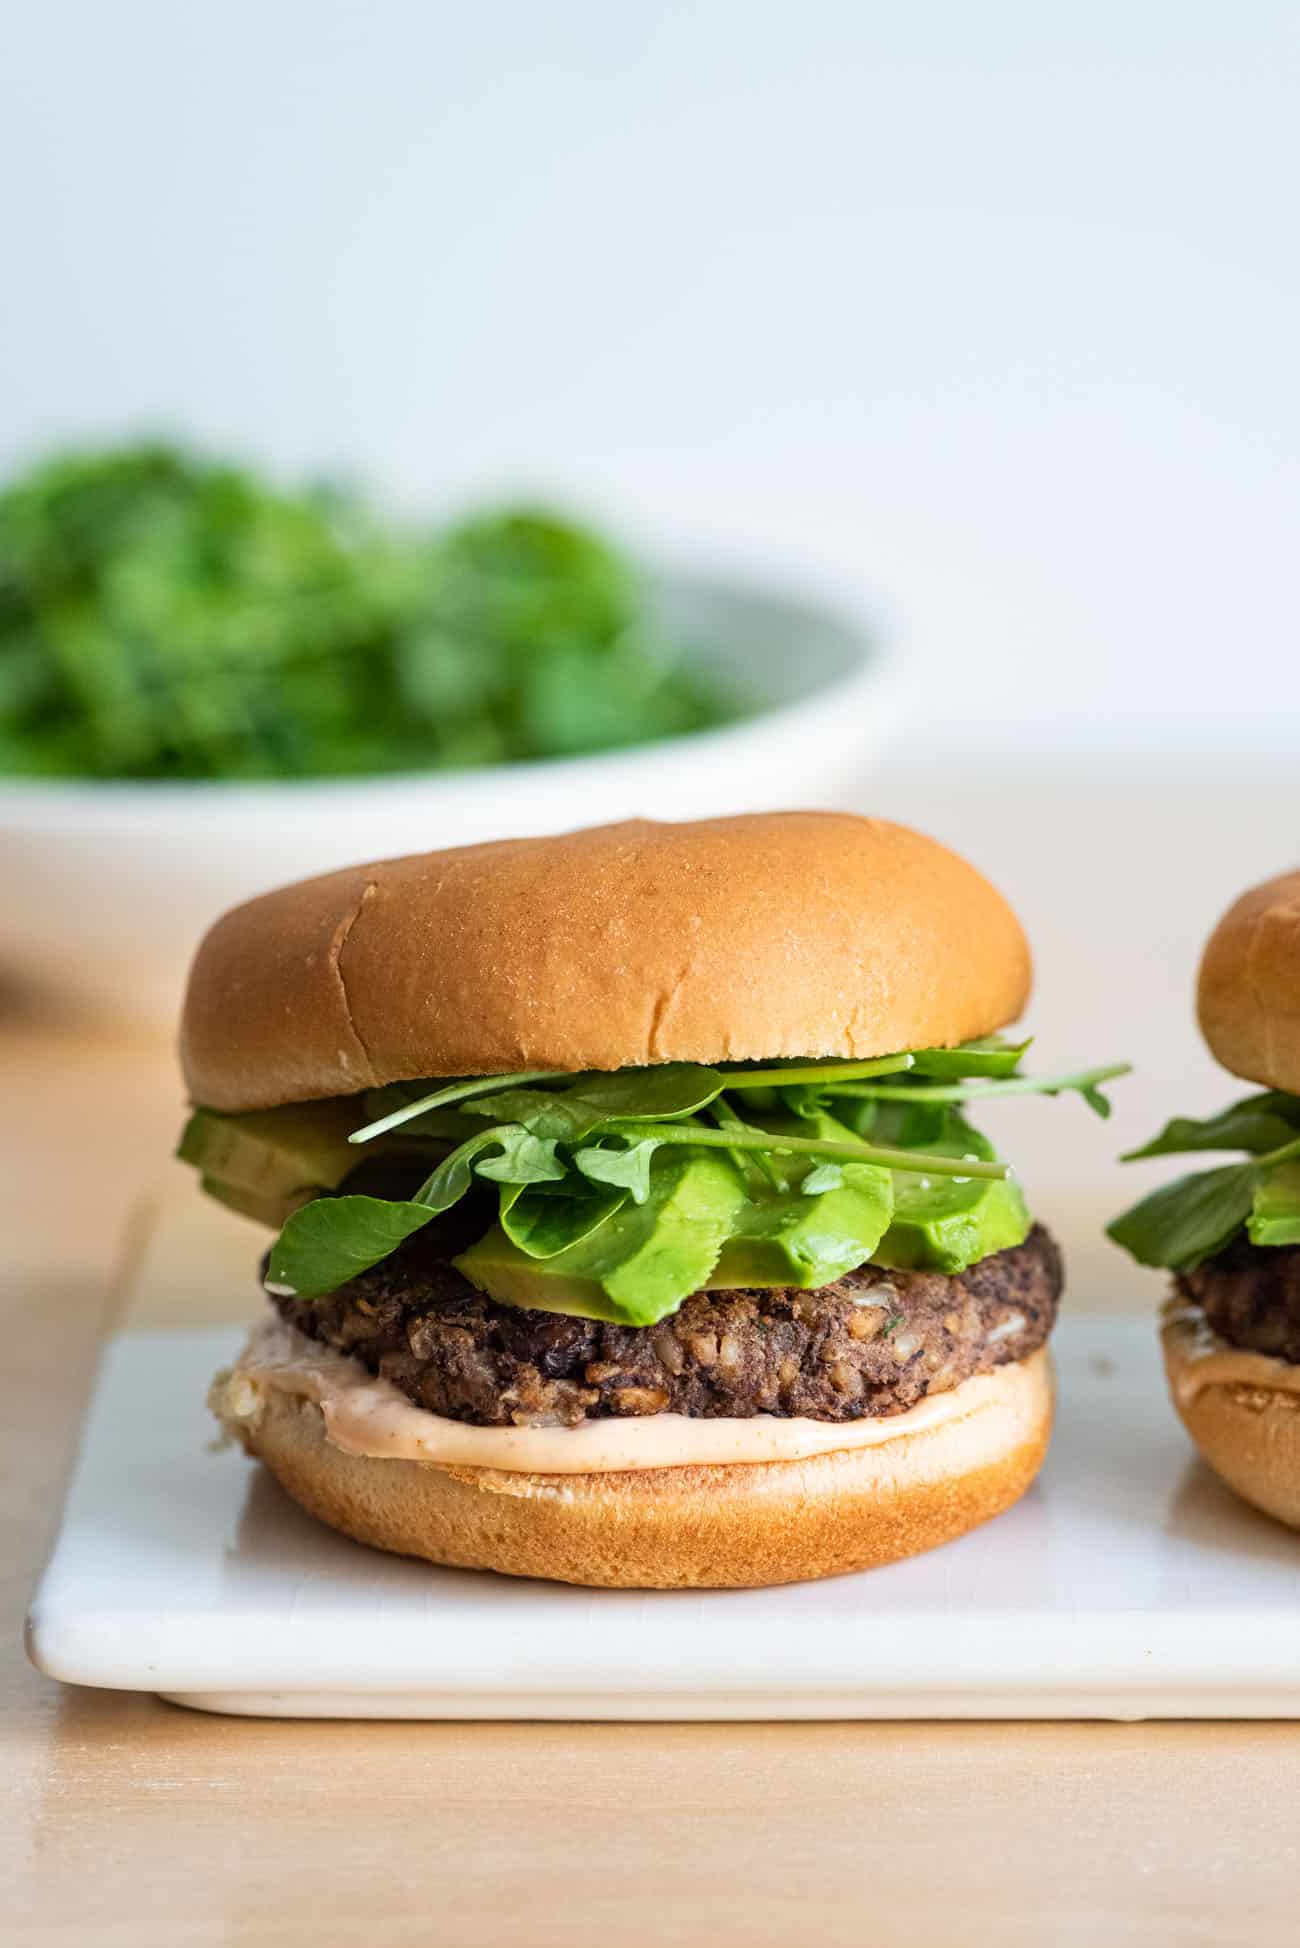 A vegan black bean burger with avocado, watercress, and chipotle mayo on a ceramic tray with a bowl of greens in the background